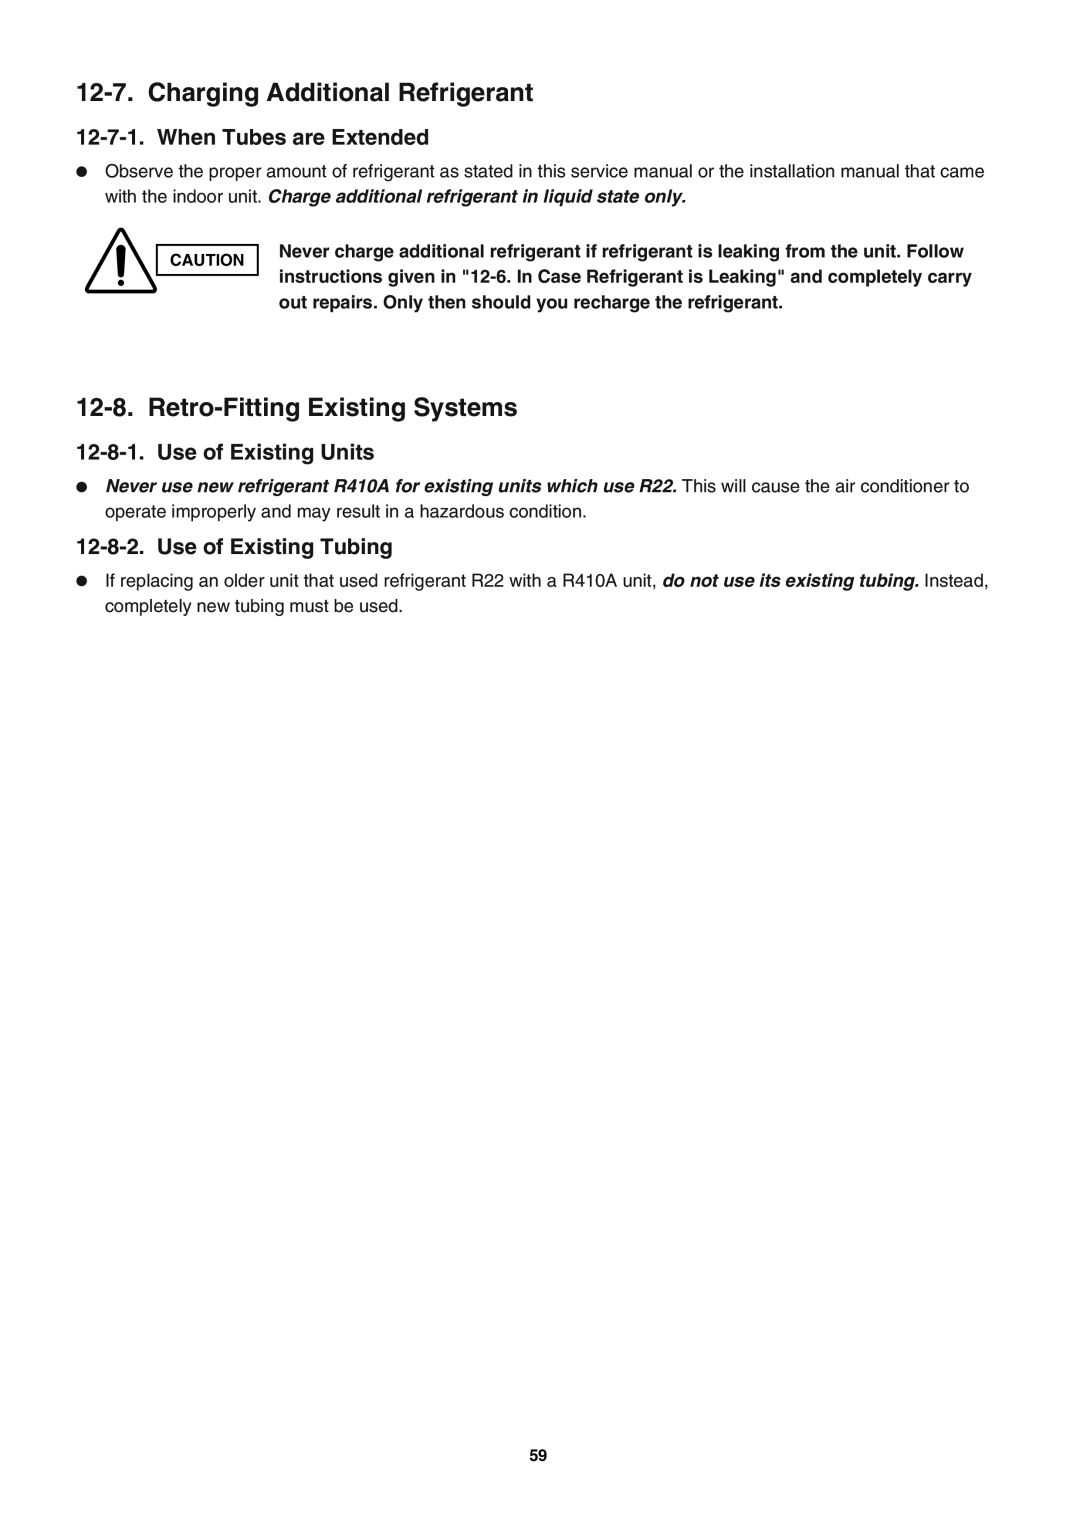 Sanyo SAP-KRV94EHDX service manual Charging Additional Refrigerant, Retro-FittingExisting Systems, When Tubes are Extended 